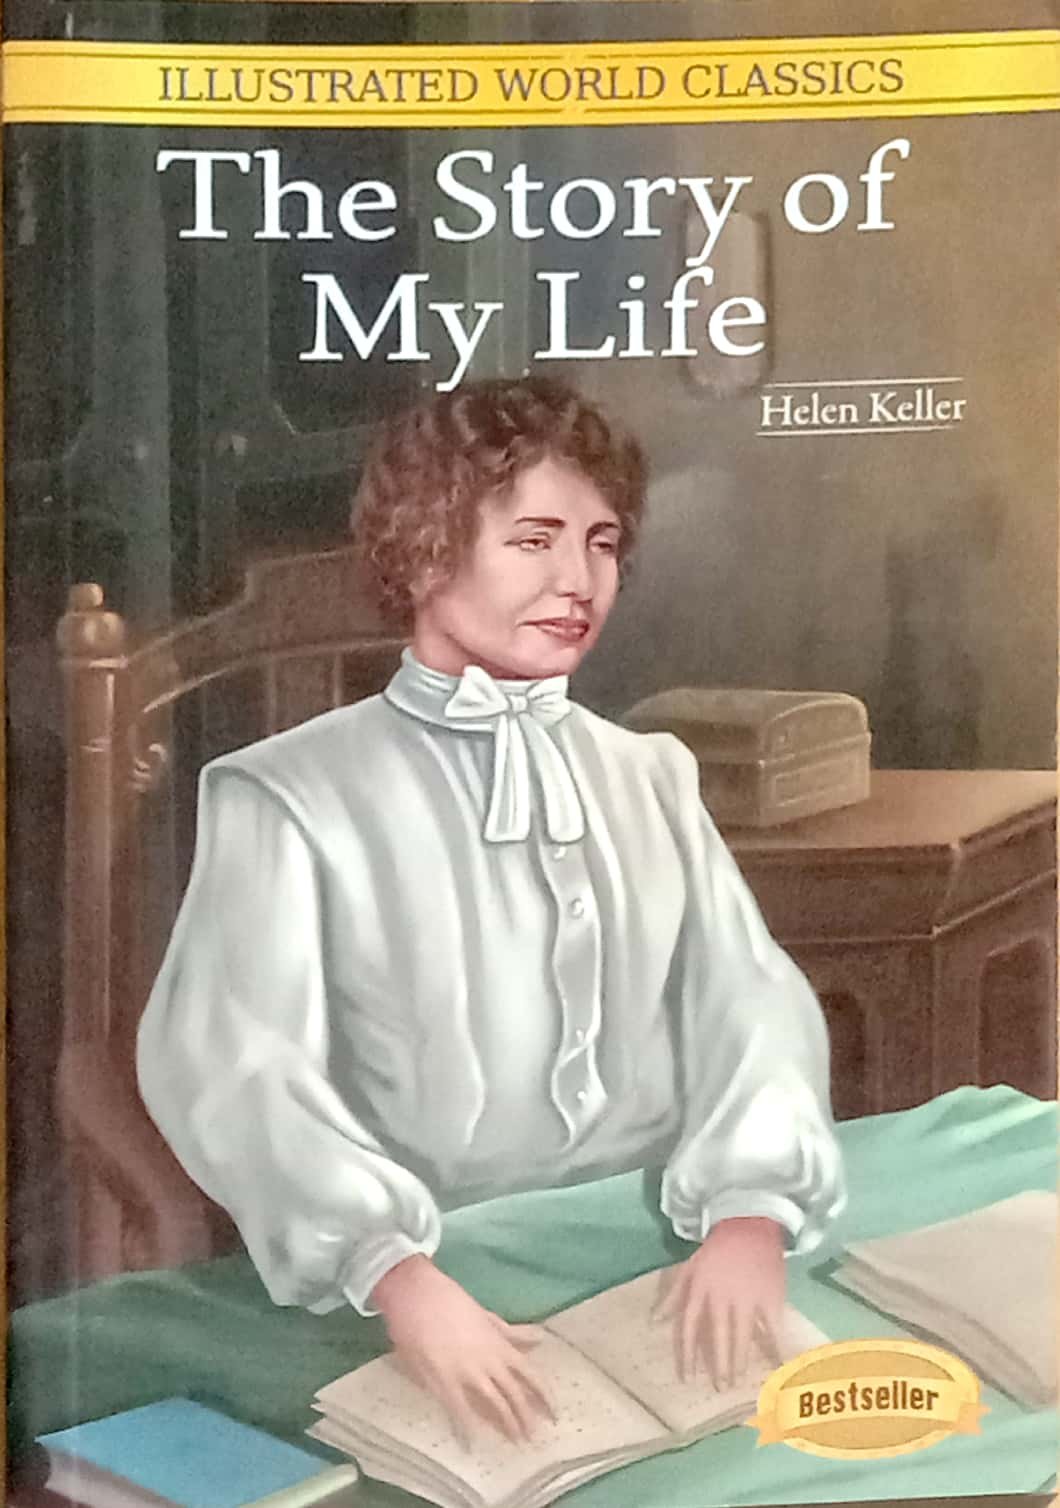 the story of my life by helen keller